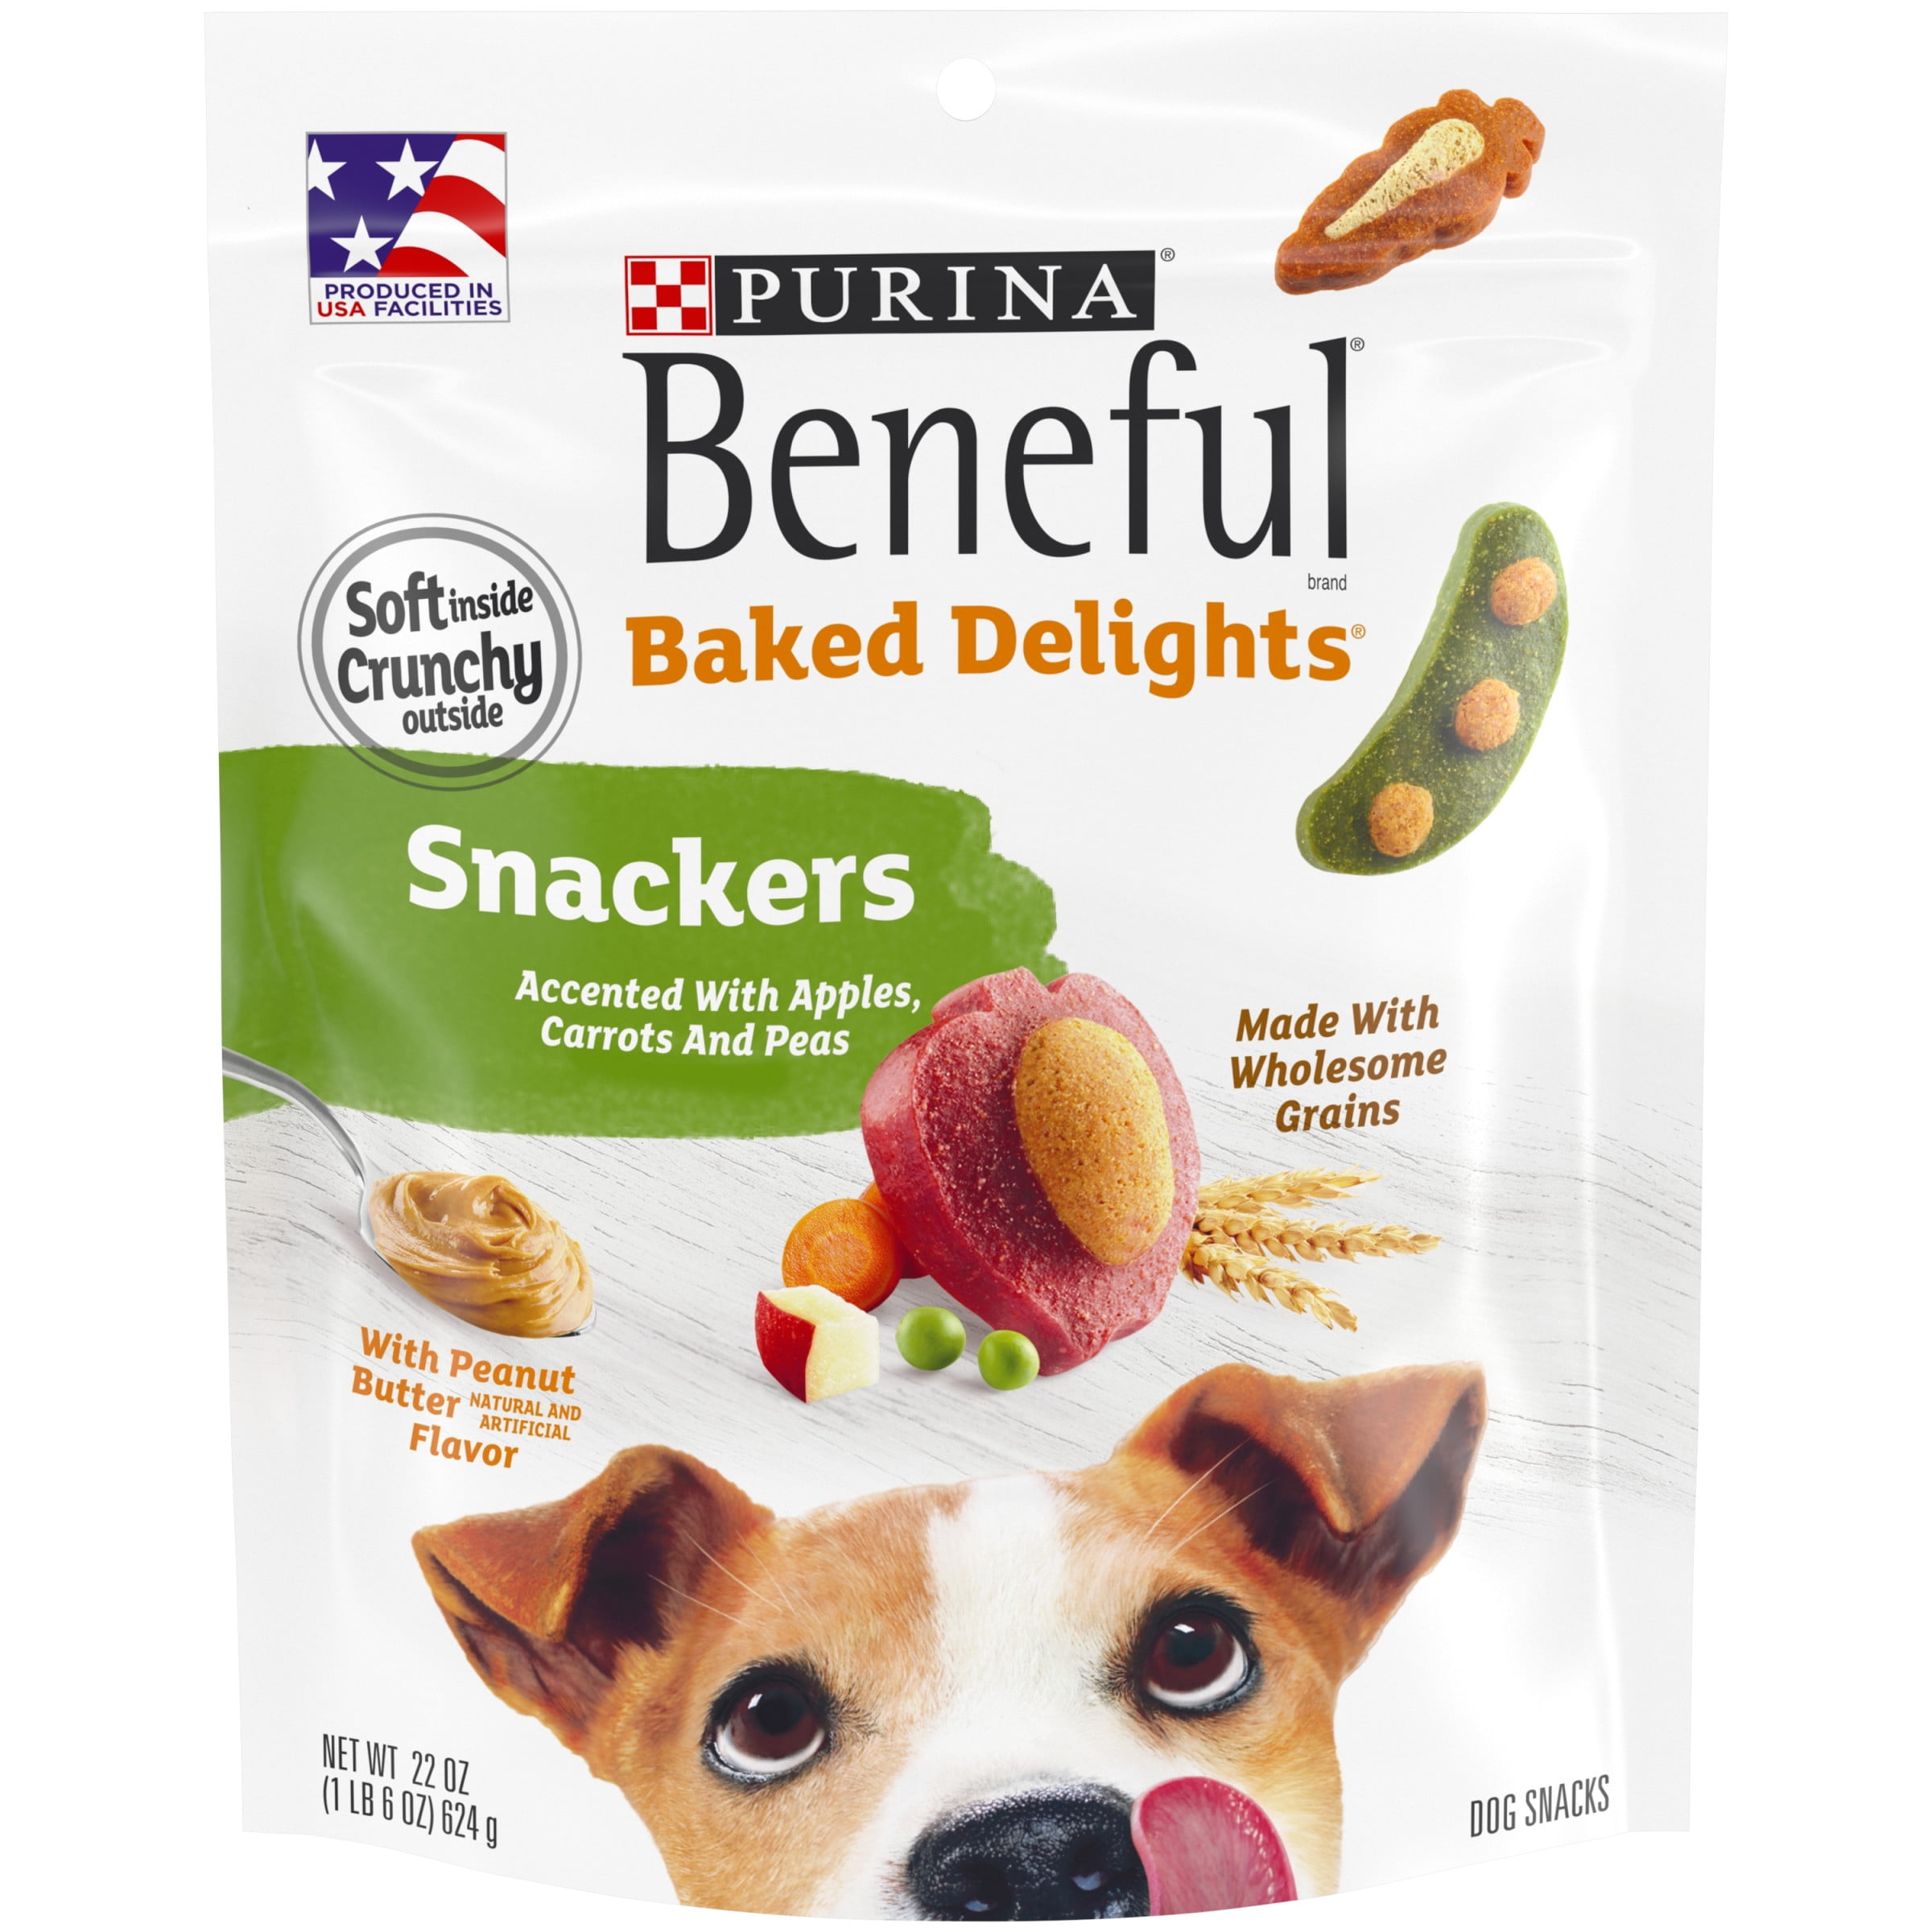 Purina Beneful Baked Delights Peanut Butter Training Treats for Dogs, 22 oz Pouch